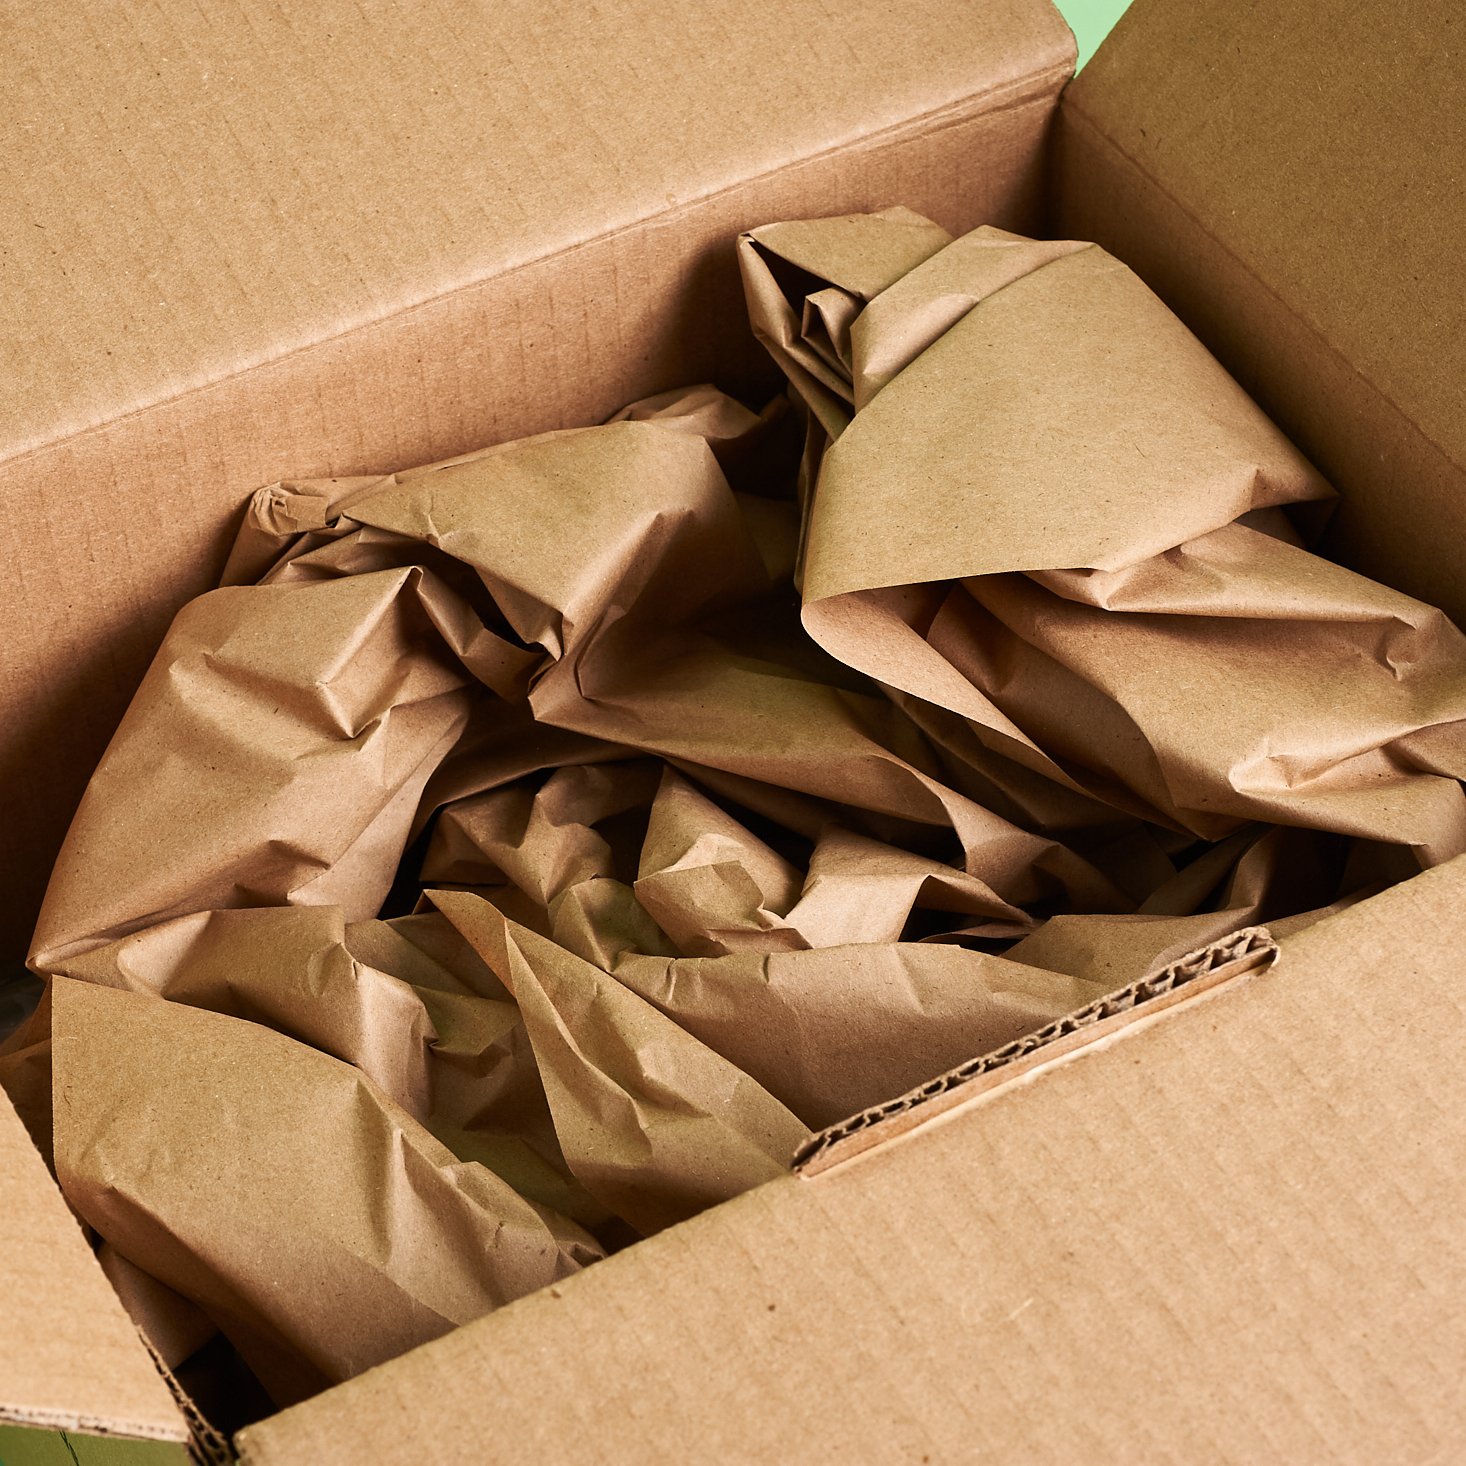 paper packing material in box